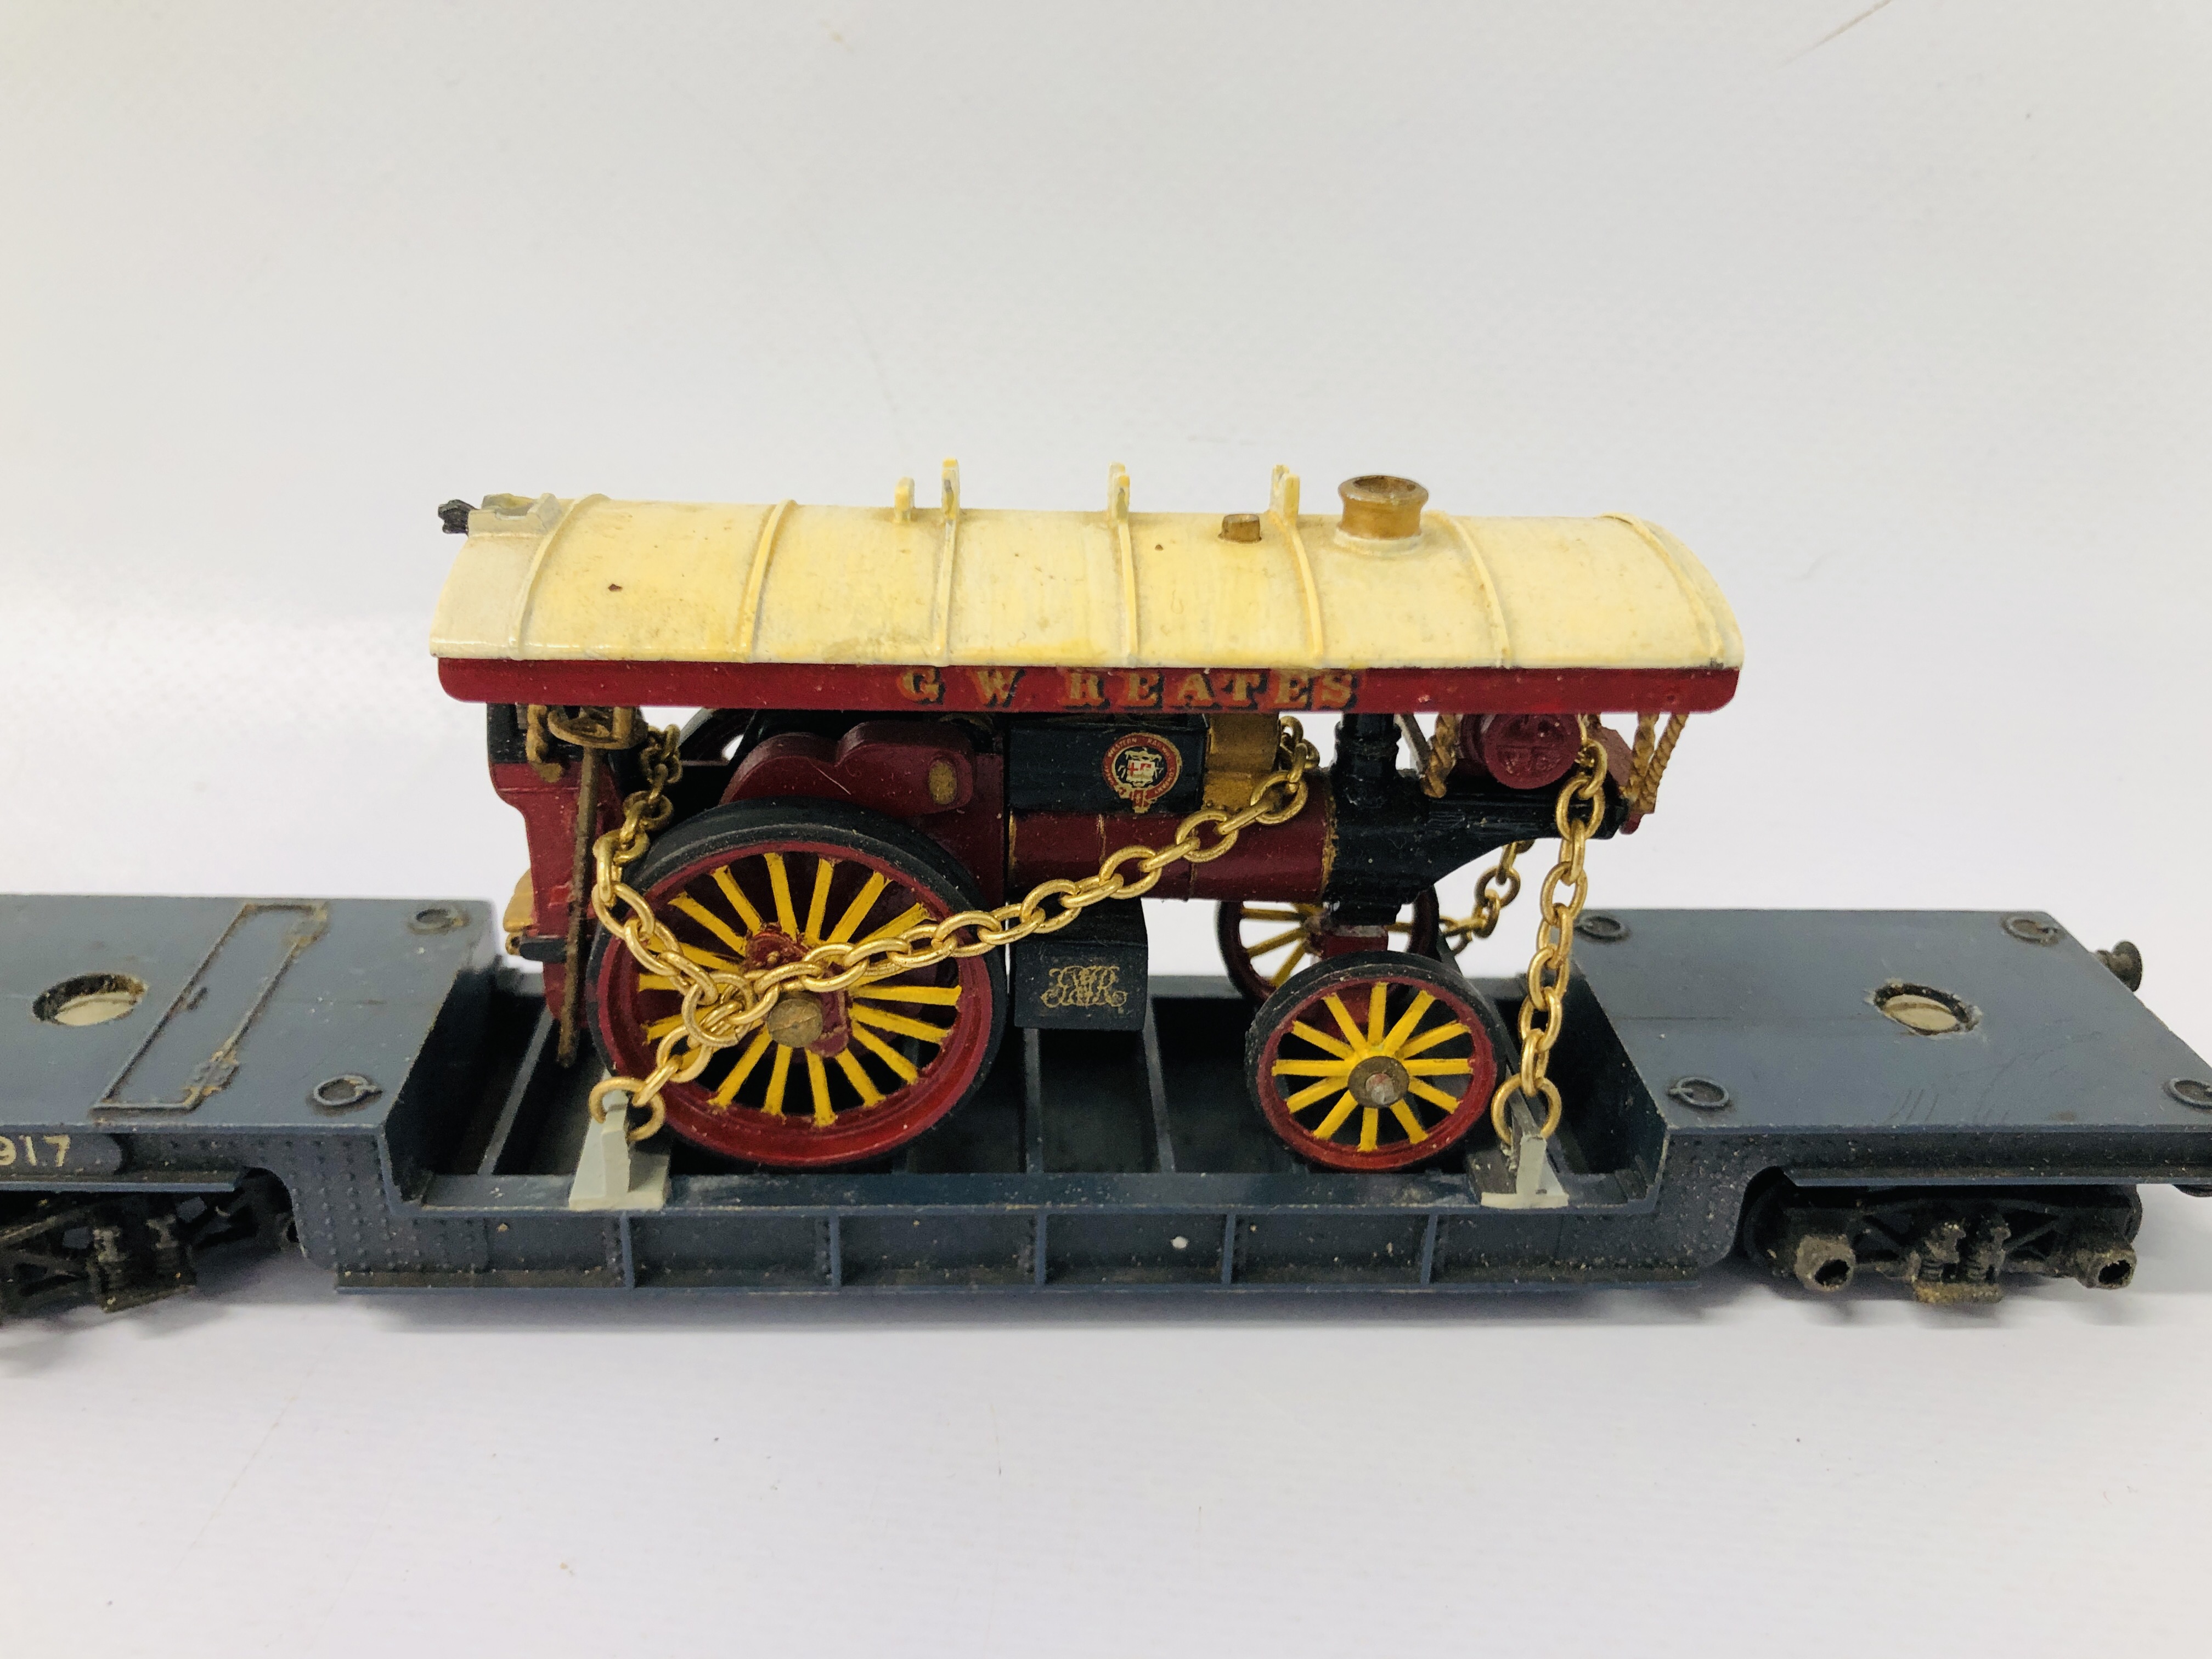 A HORNBY DUBO MECCANO 00 GAUGE DUCHESS OF MONTROSE LOCOMOTIVE & 3 TRIANG 00 GAUGE WAGONS WITH CARGO - Image 9 of 14